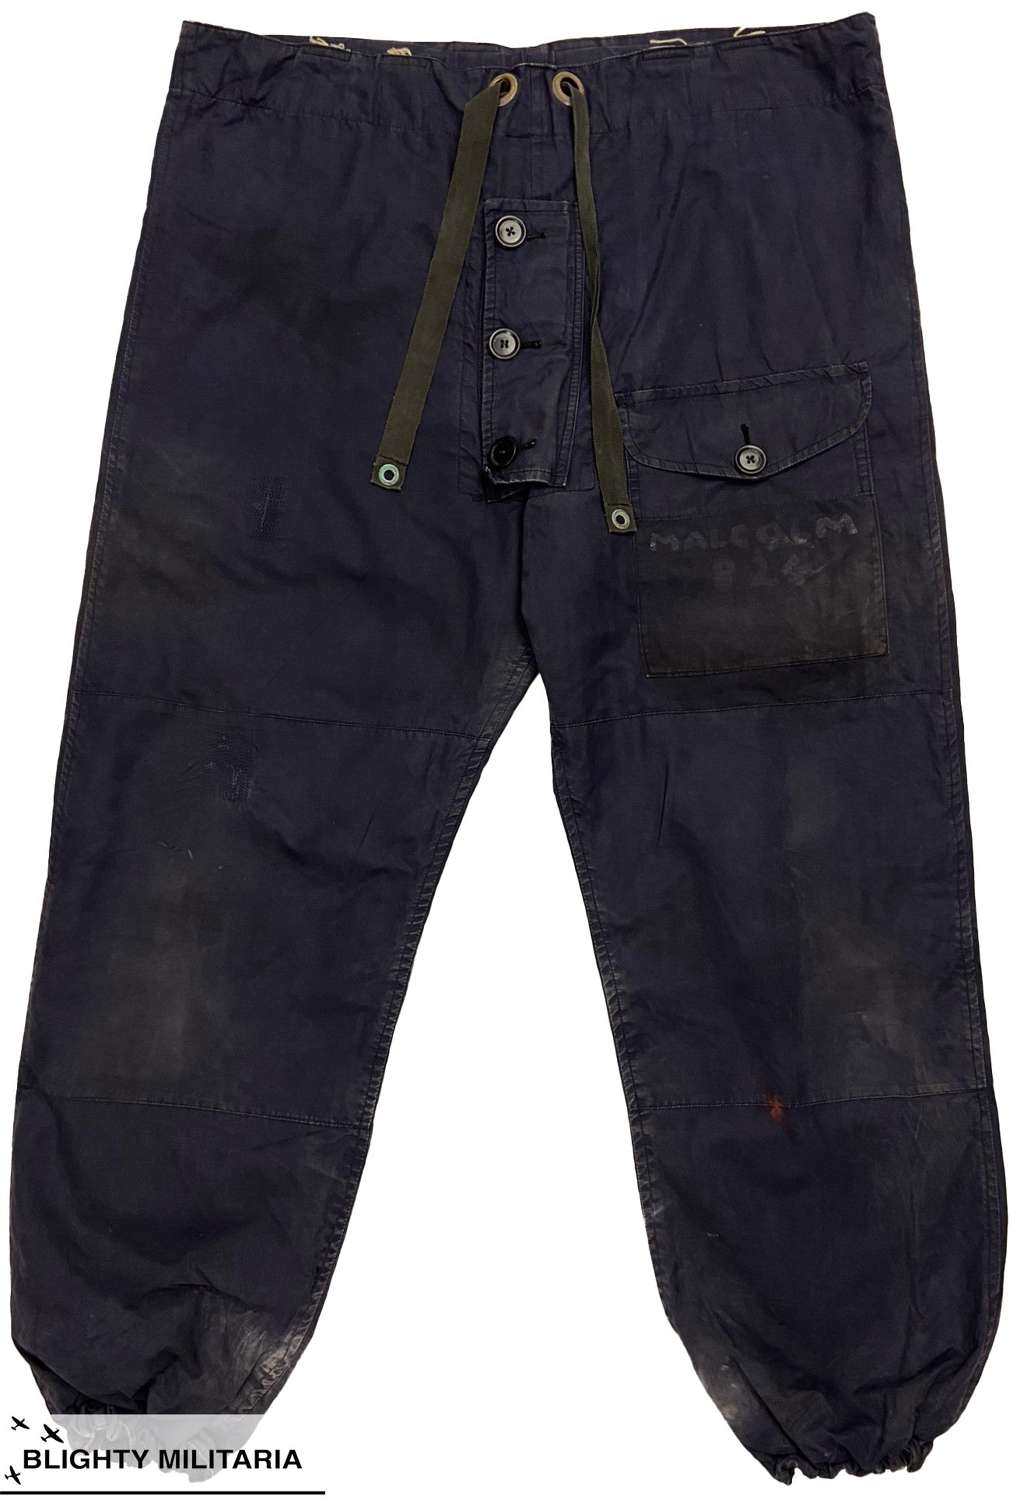 Original 1954 Dated Royal Navy Ventile Deck Trousers by Belstaff